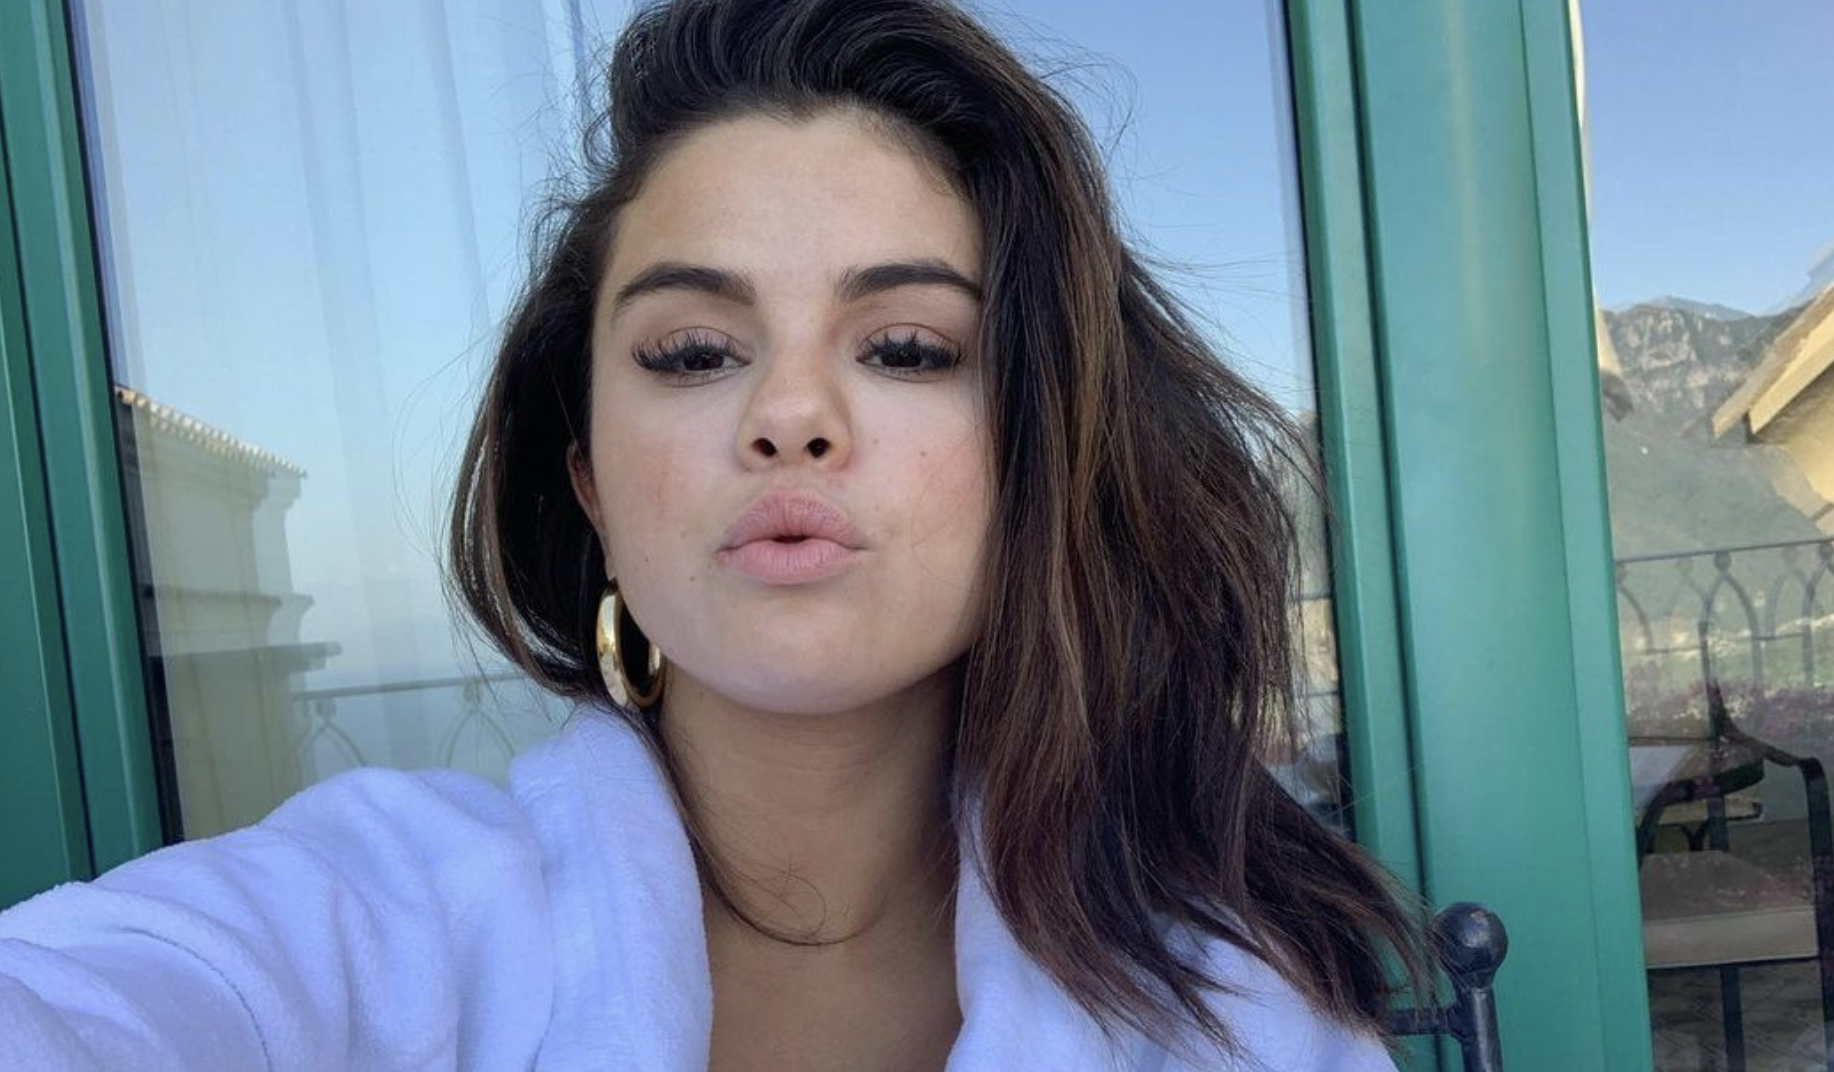 Selena Gomez Got a New Tattoo of Praying Hands Before the AMAs